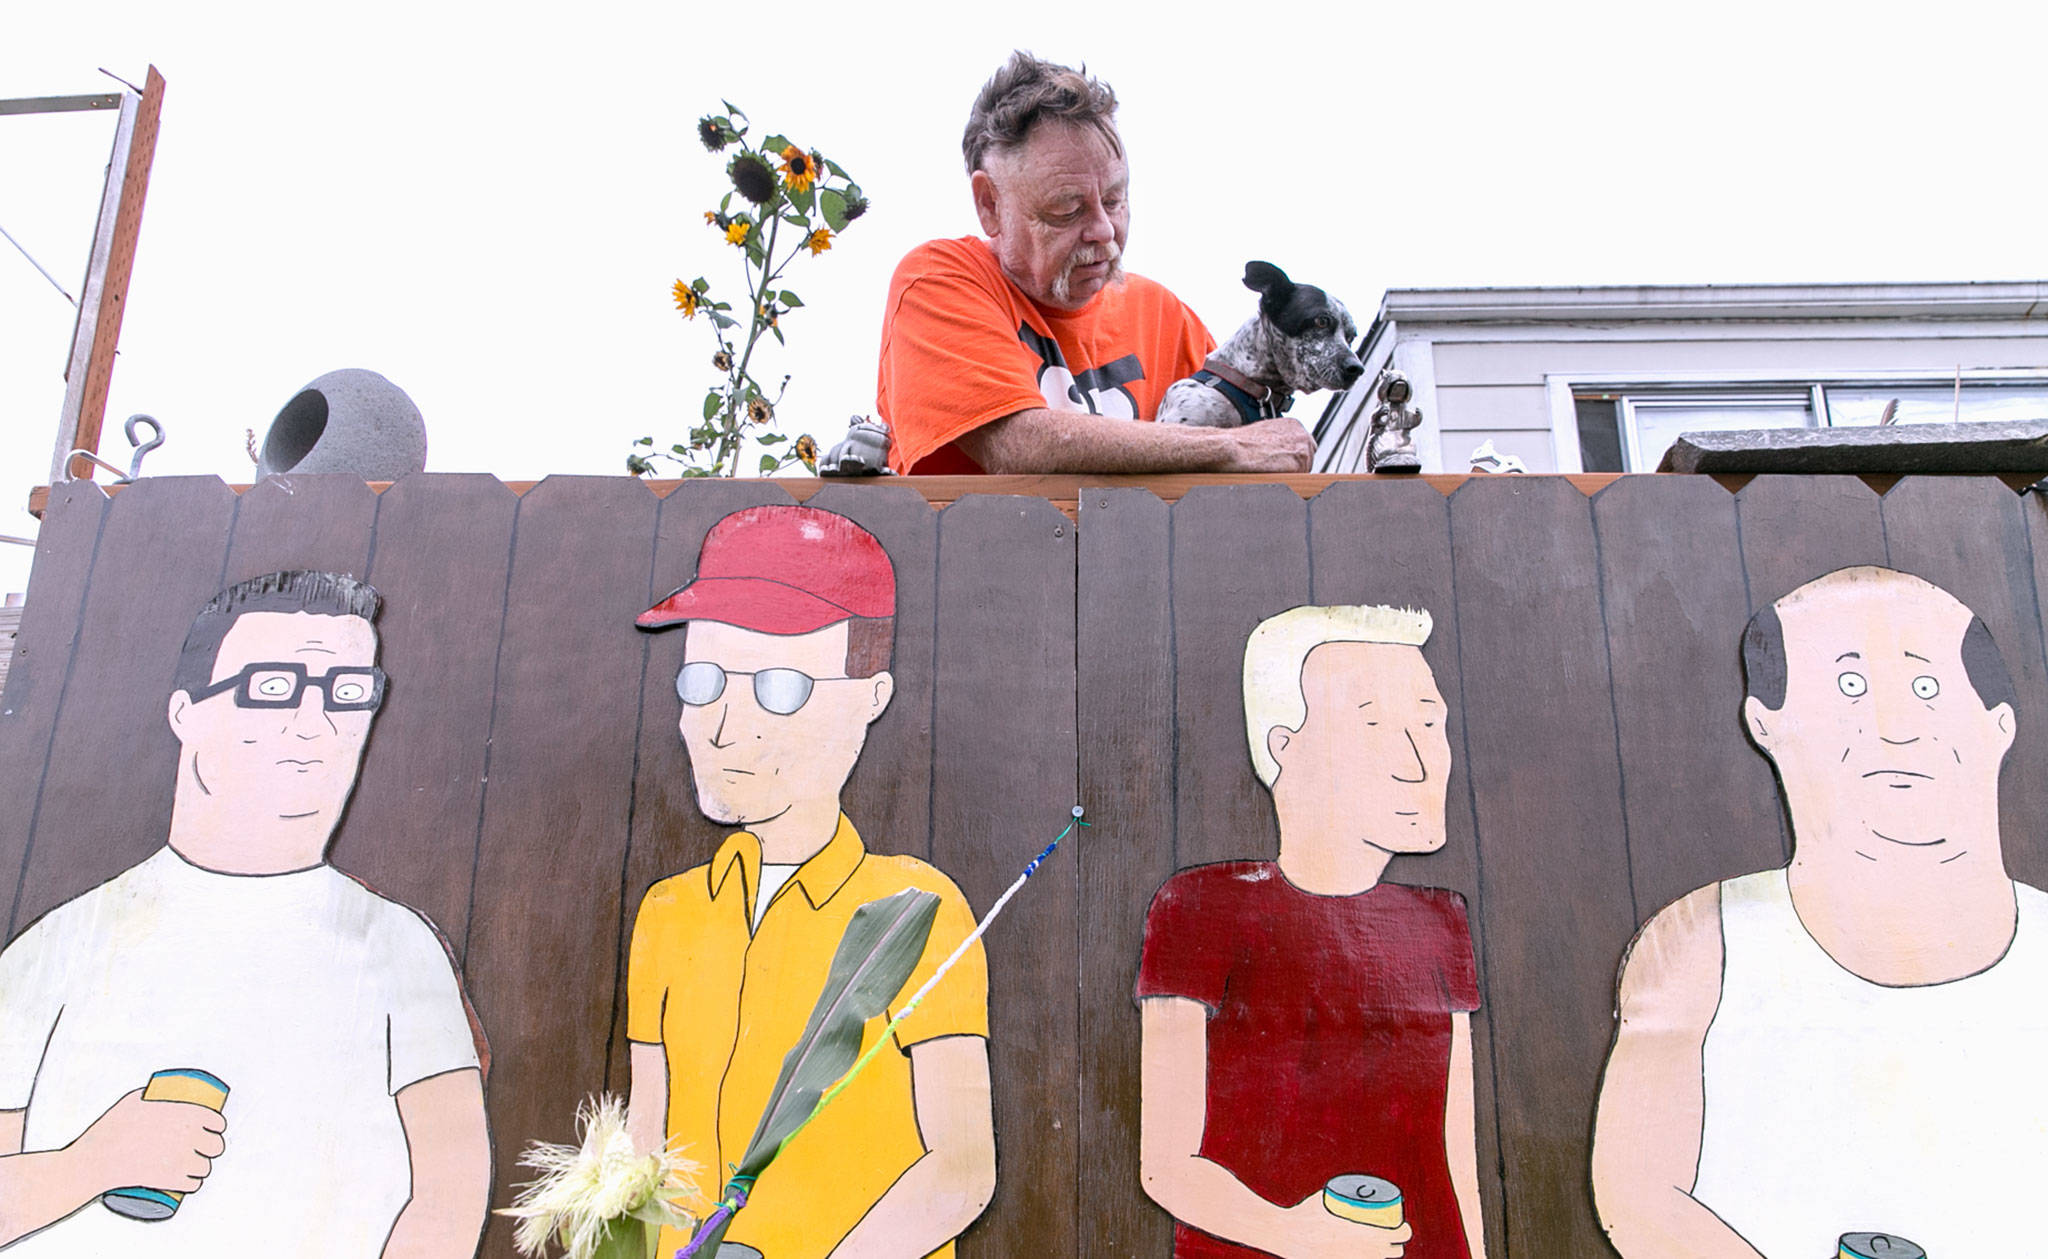 Kelly Hatley, 63, proudly displays characters from “King of the Hill” in his front yard in Freeland on Whidbey Island. (Kevin Clark / The Herald)                                Kevin Clark / The Herald.                                &lt;em&gt;Kelly Hatley, 63, proudly displays characters from “King of the Hill” in the front yard of his home in Freeland.&lt;/em&gt;